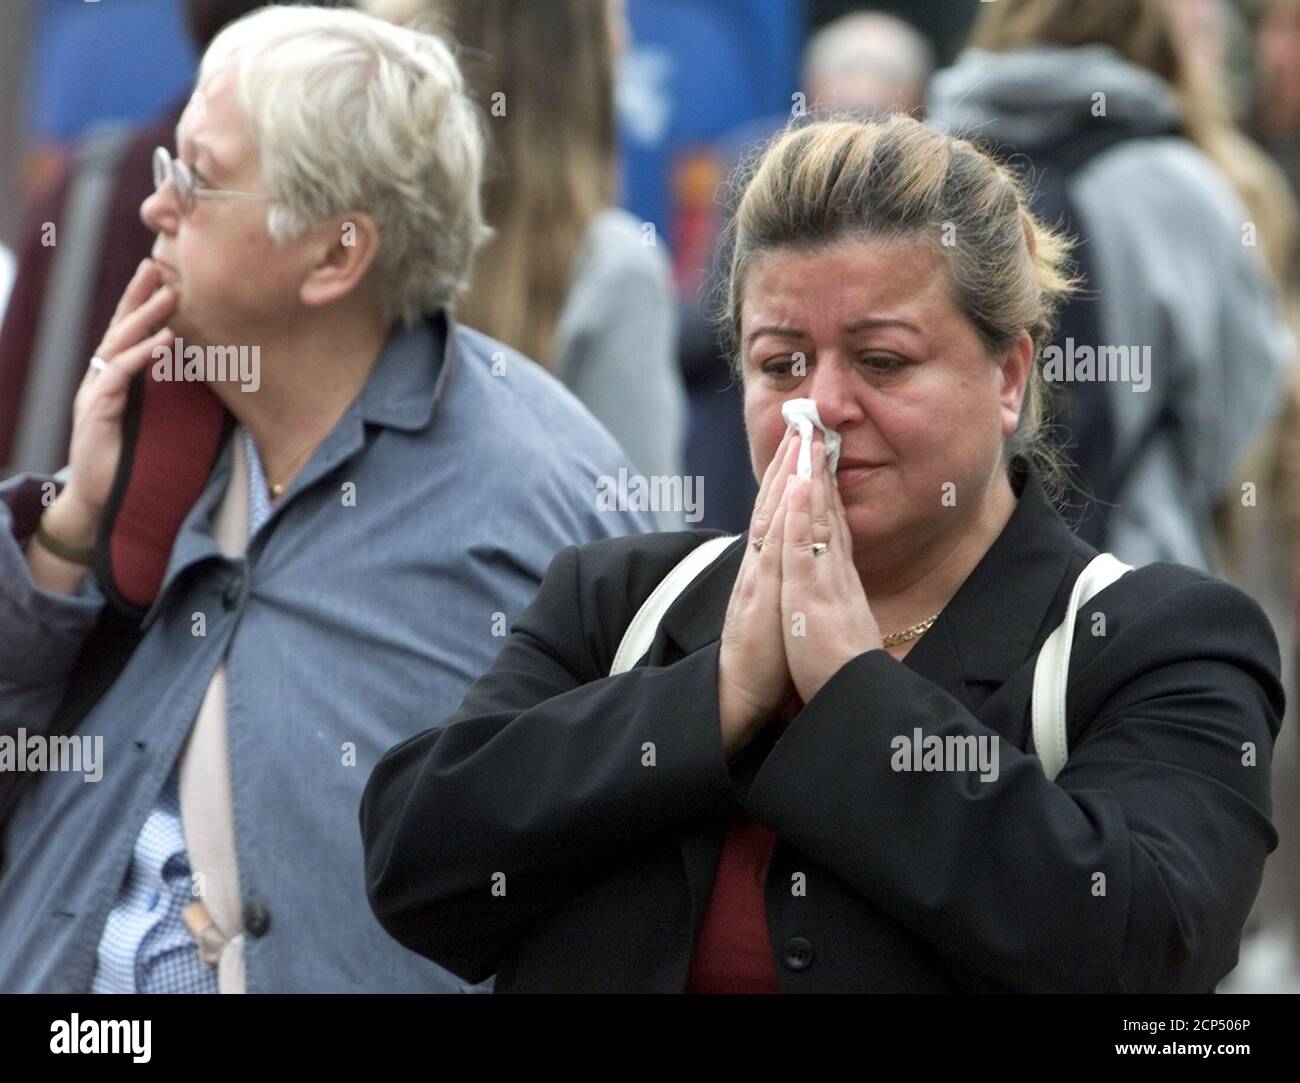 Swedish women cry infront of the hospital where Swedish Foreign Minister Anna Lindh died in Stockholm, September 11, 2003. Swedish Foreign Minister Lindh died in hospital on Thursday, a day after being stabbed by a mystery attacker, stunning a normally peaceful nation as it prepared for a crucial referendum on the euro. REUTERS/Alexander Demianchuk  AD Stock Photo